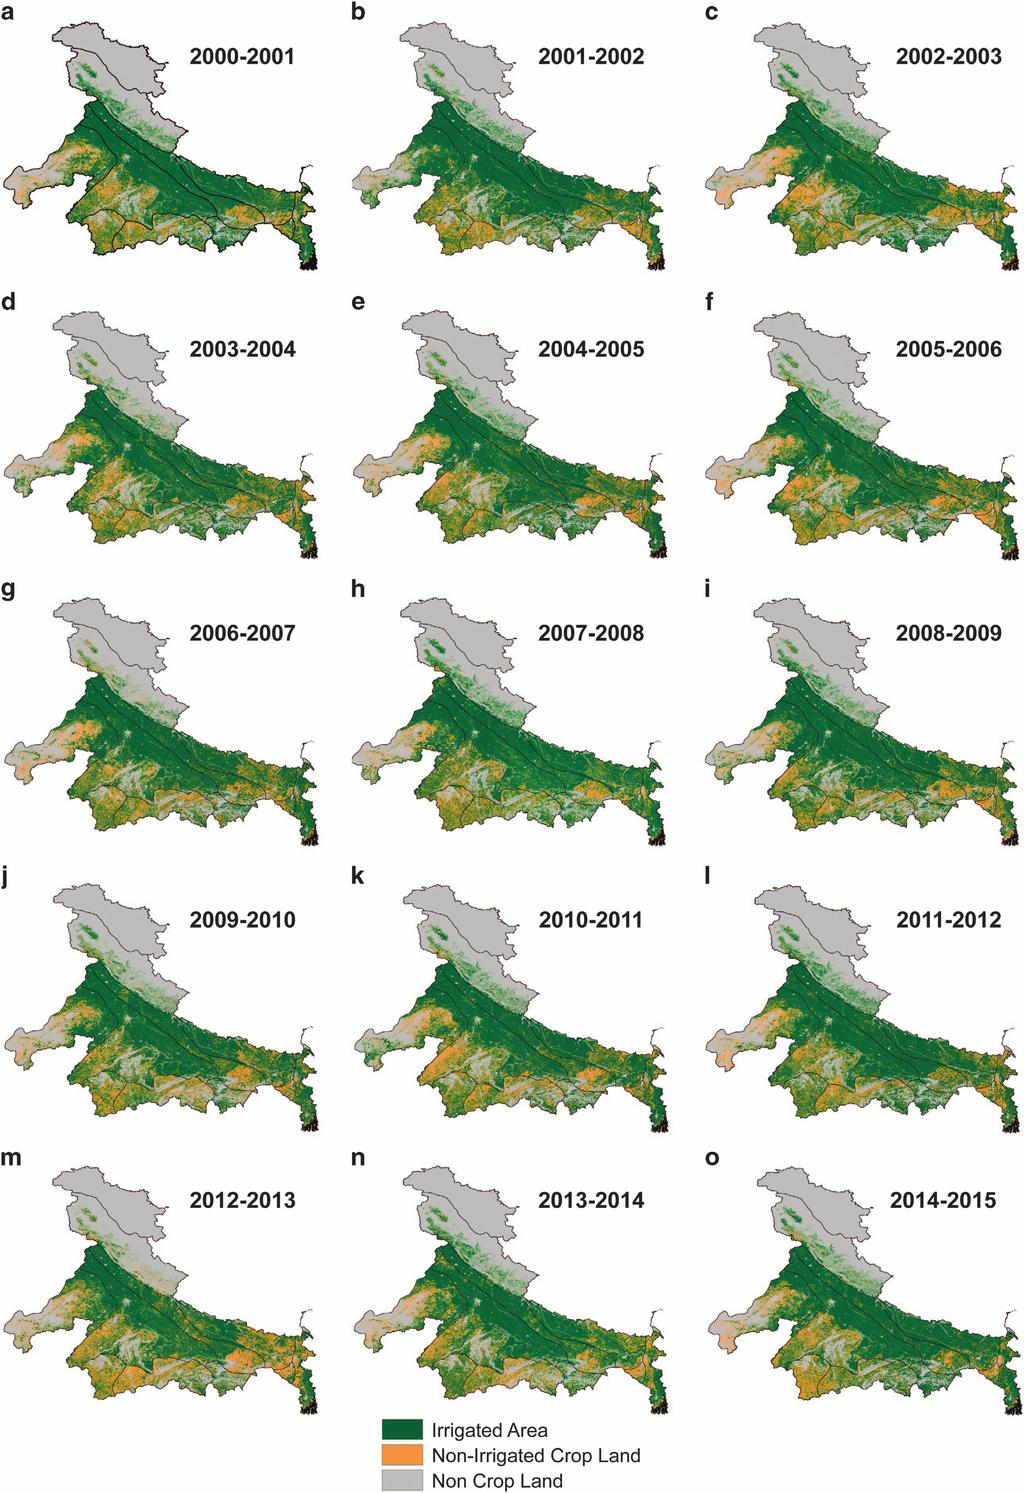 www.nature.com/sdata/ Figure 2. Changes and variability in irrigated area in the Indo-Gangetic Plain.